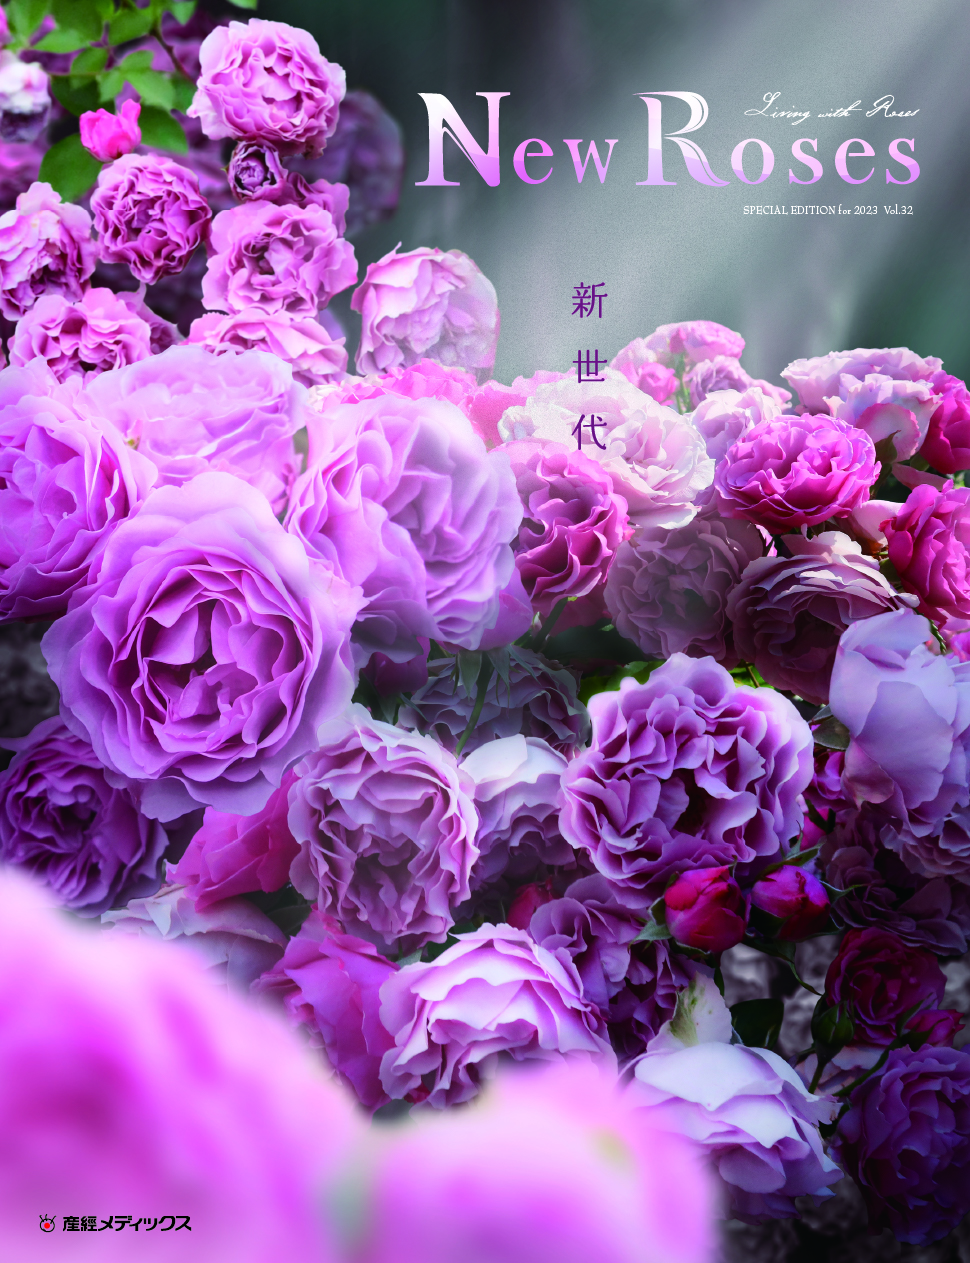 New Roses